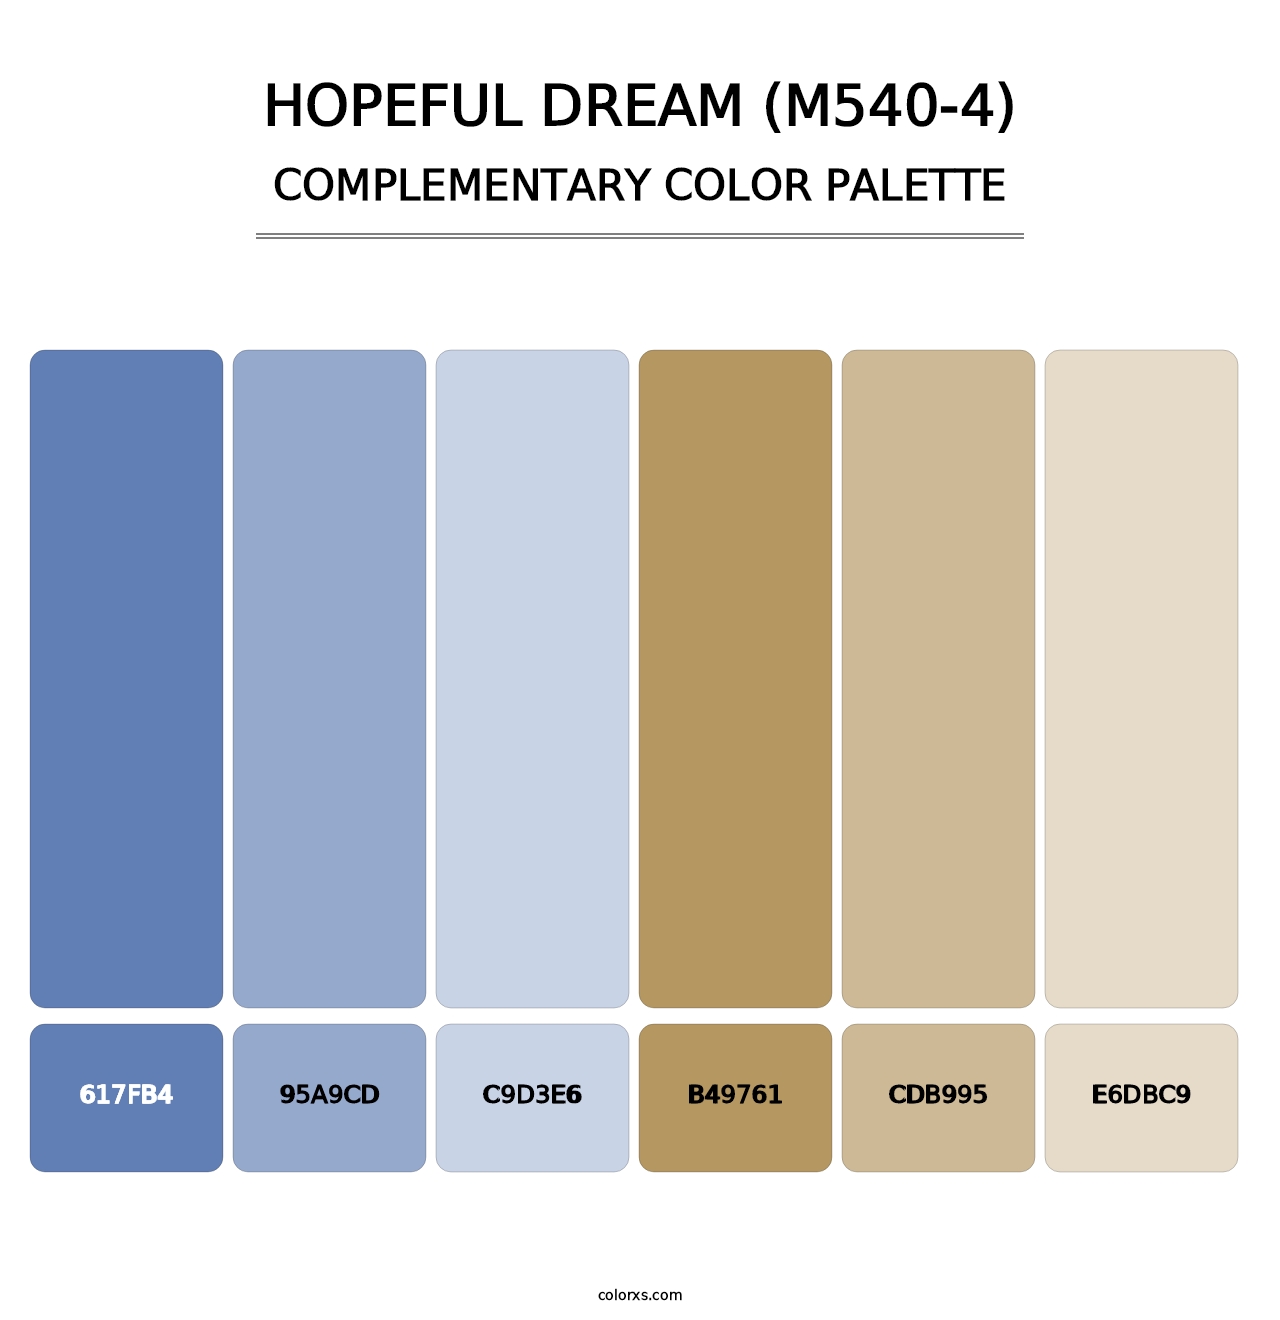 Hopeful Dream (M540-4) - Complementary Color Palette